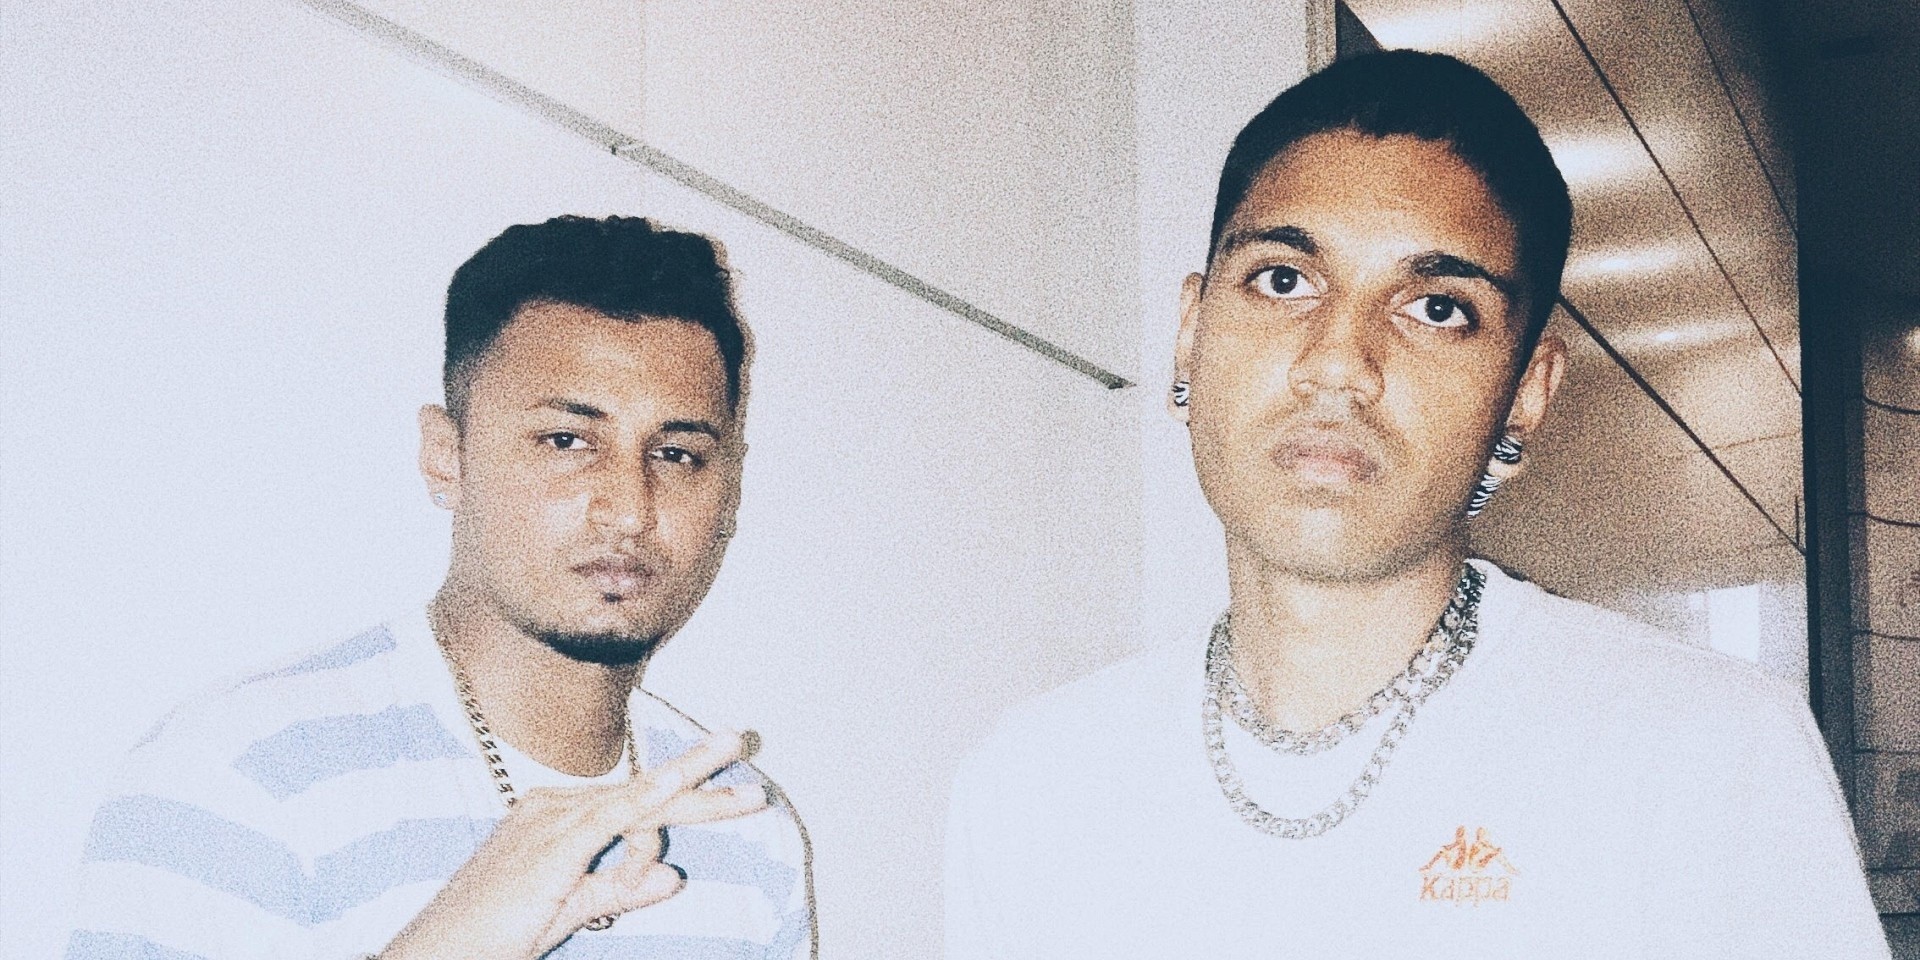 "We don’t want to make another 'Plain Jane'. We want to create something new": Meet Slime G4ng, the rap duo with a purpose